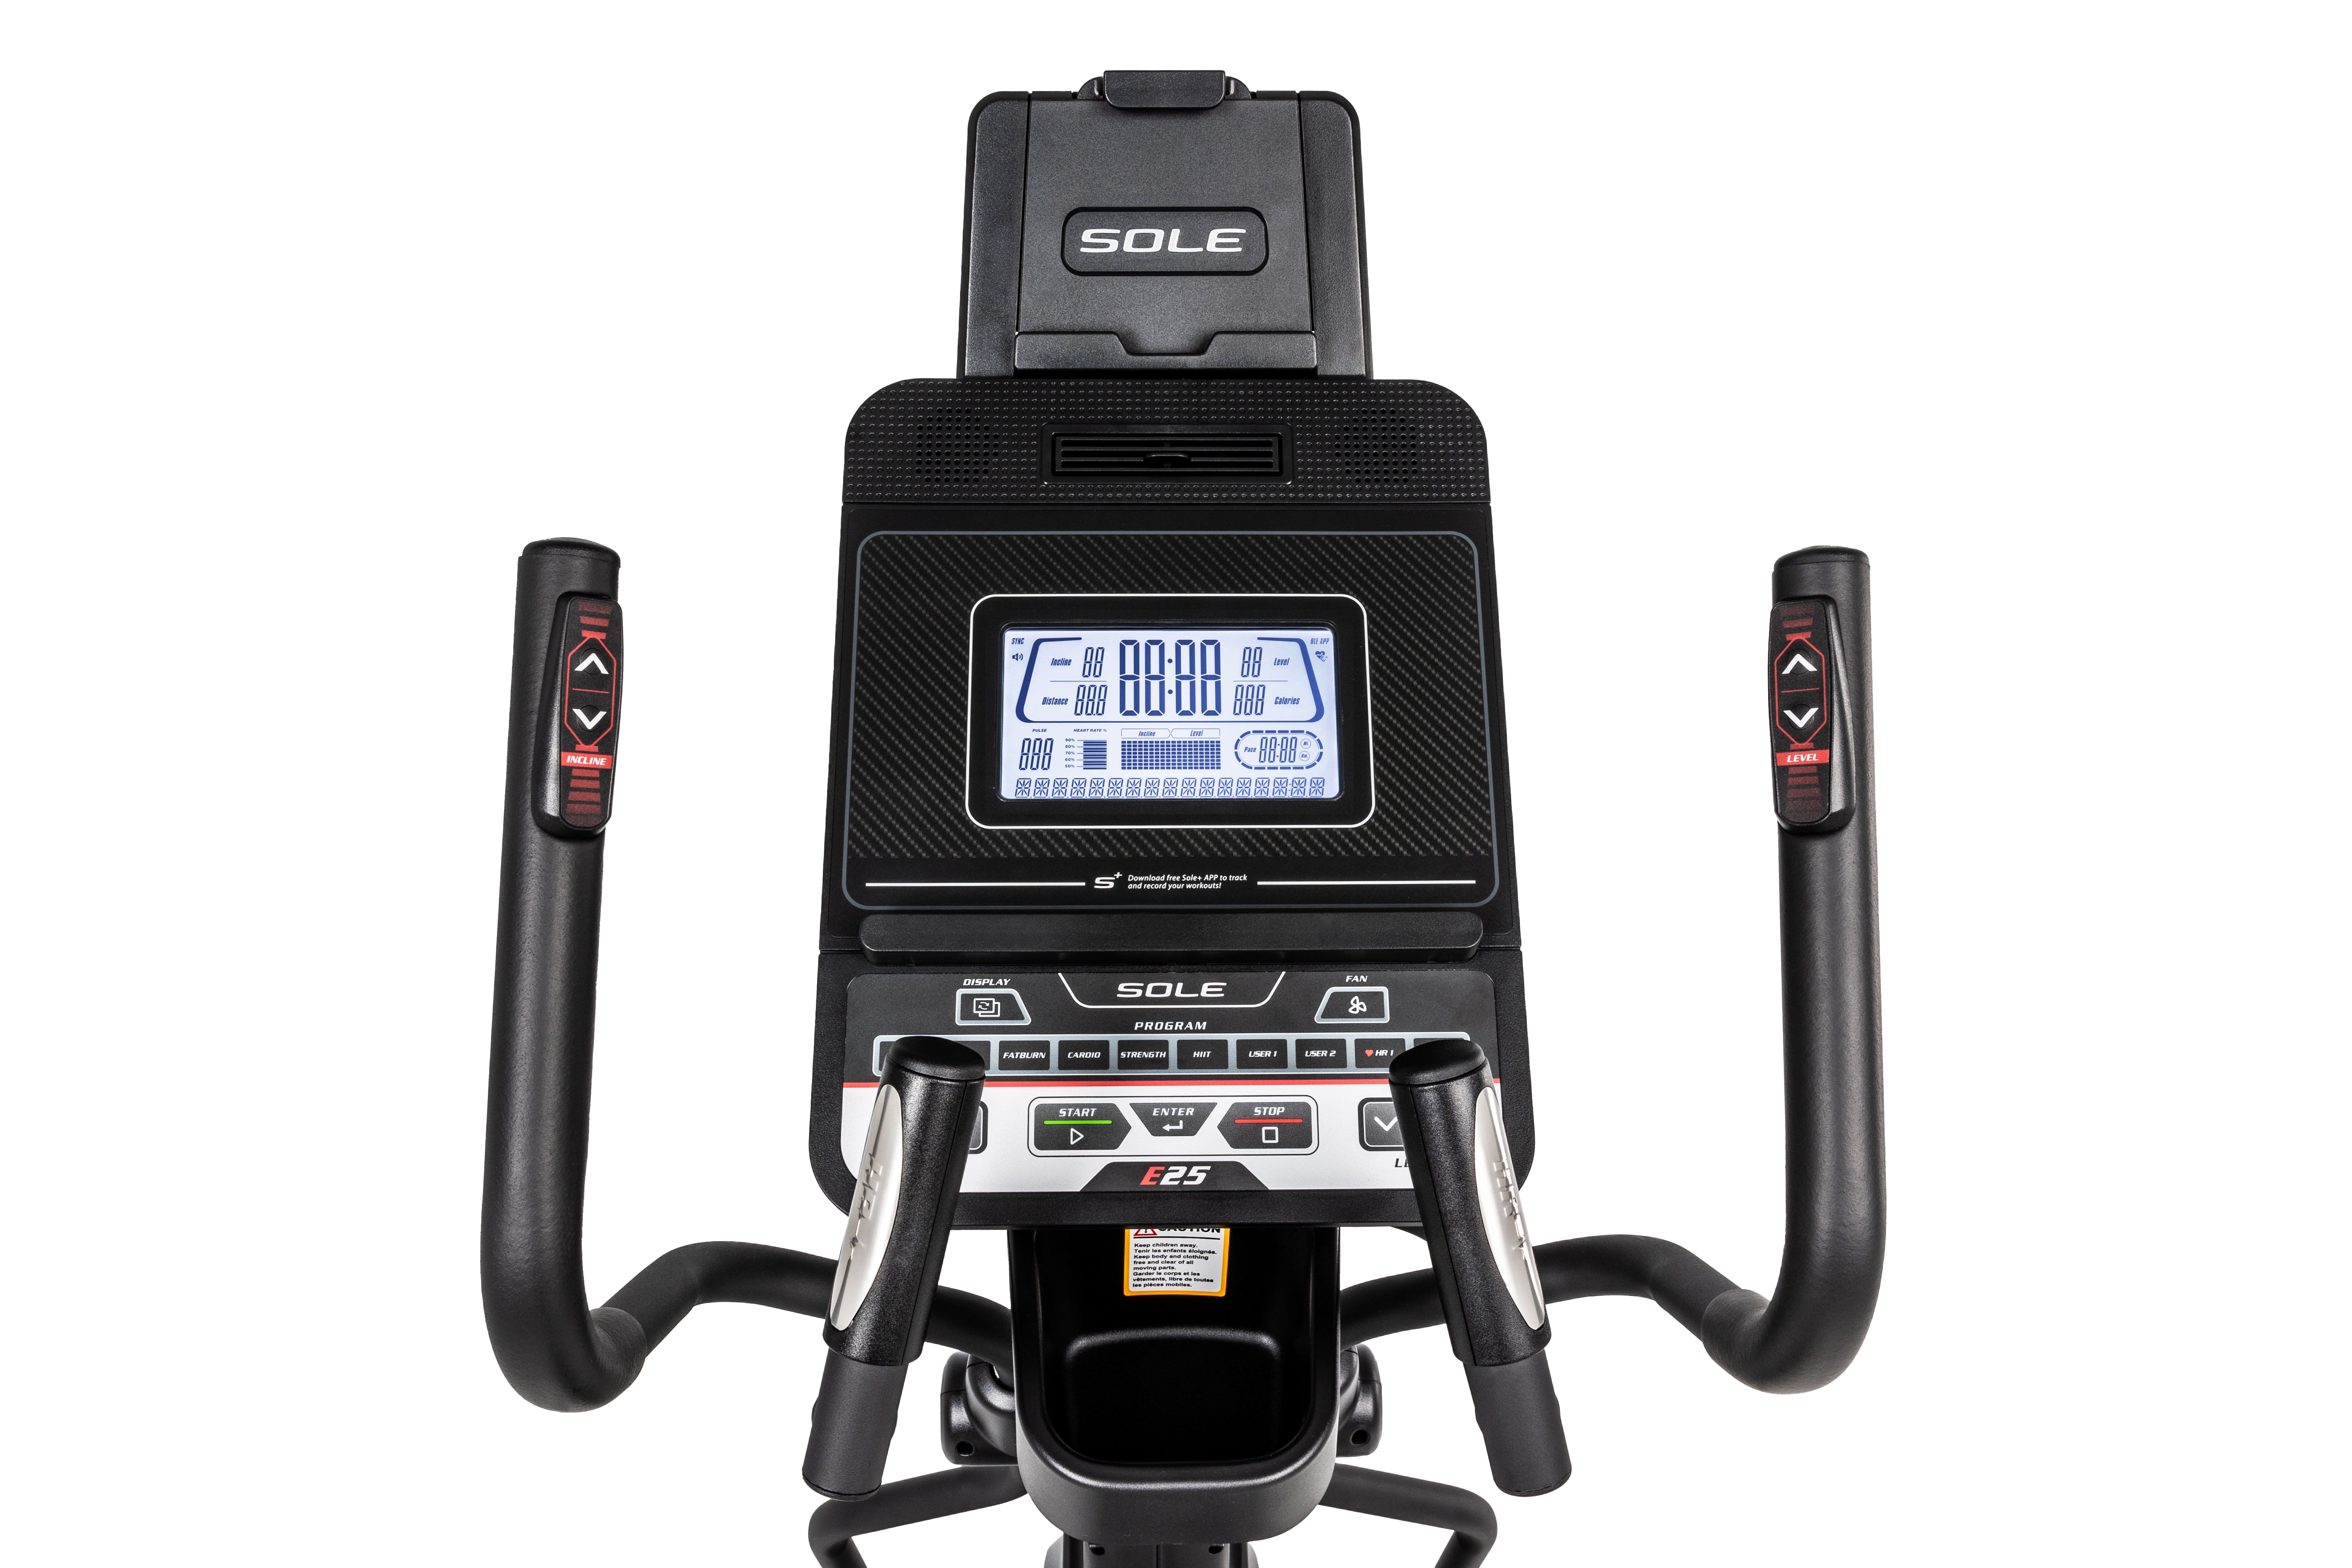 Close-up view of the Sole E25 elliptical machine's console, displaying the digital screen with workout metrics, brand logo, control buttons, and handlebars with resistance and incline adjustment buttons, set against a white background.